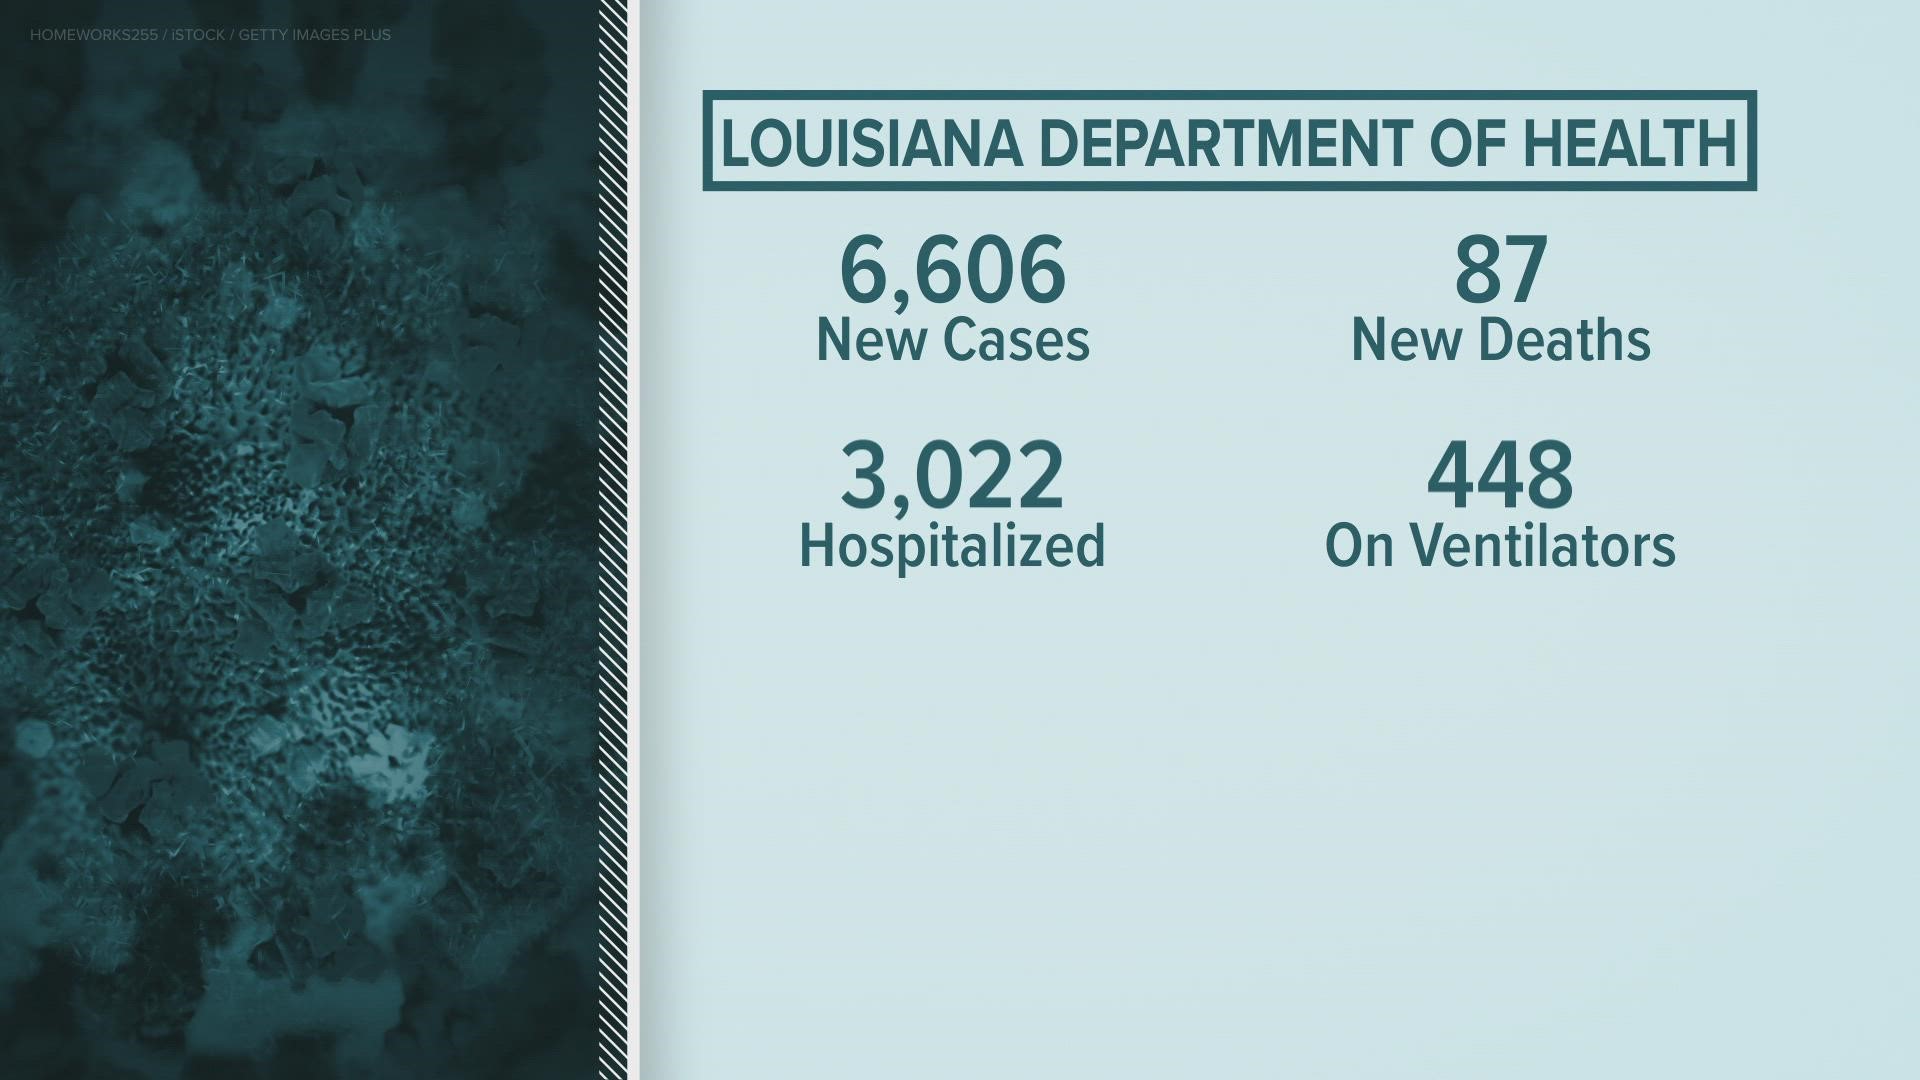 The State of Louisiana reported more than 6,000 new cases and 87 new deaths from COVID Wednesday.